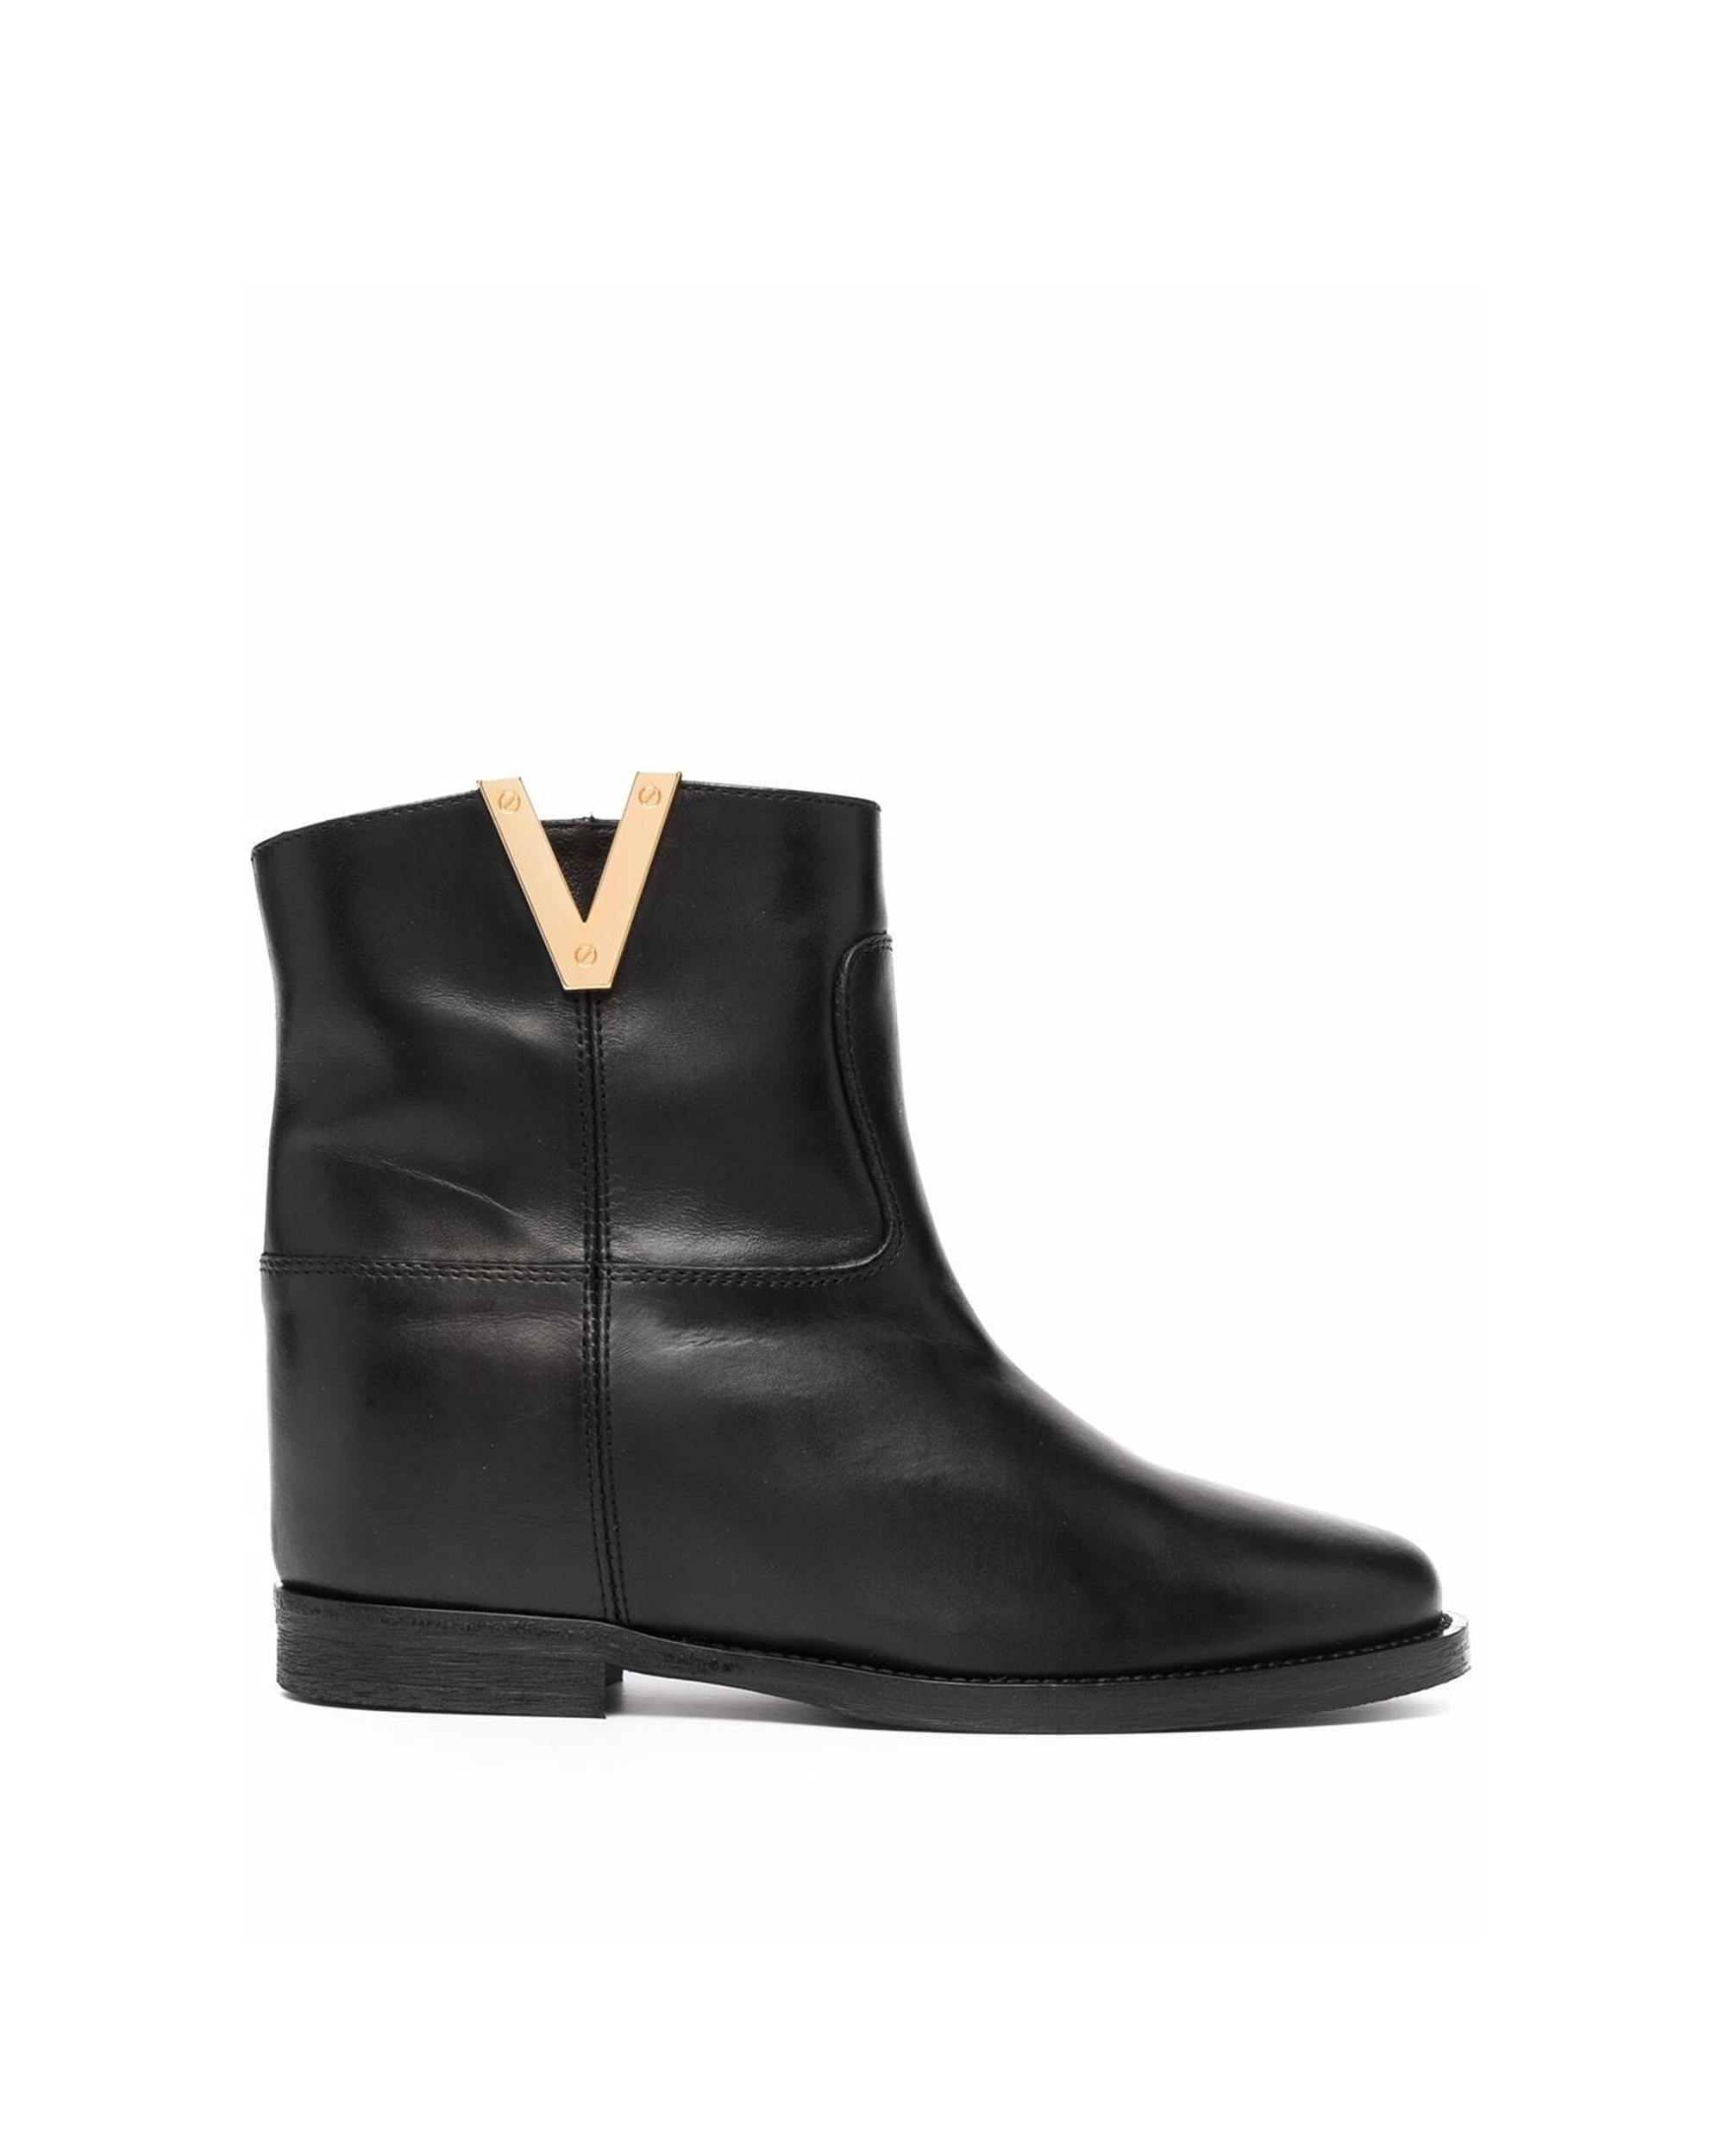 VIA ROMA 15 BLACK LEATHER ANKLE BOOT WITH GOLDEN "V" DETAIL